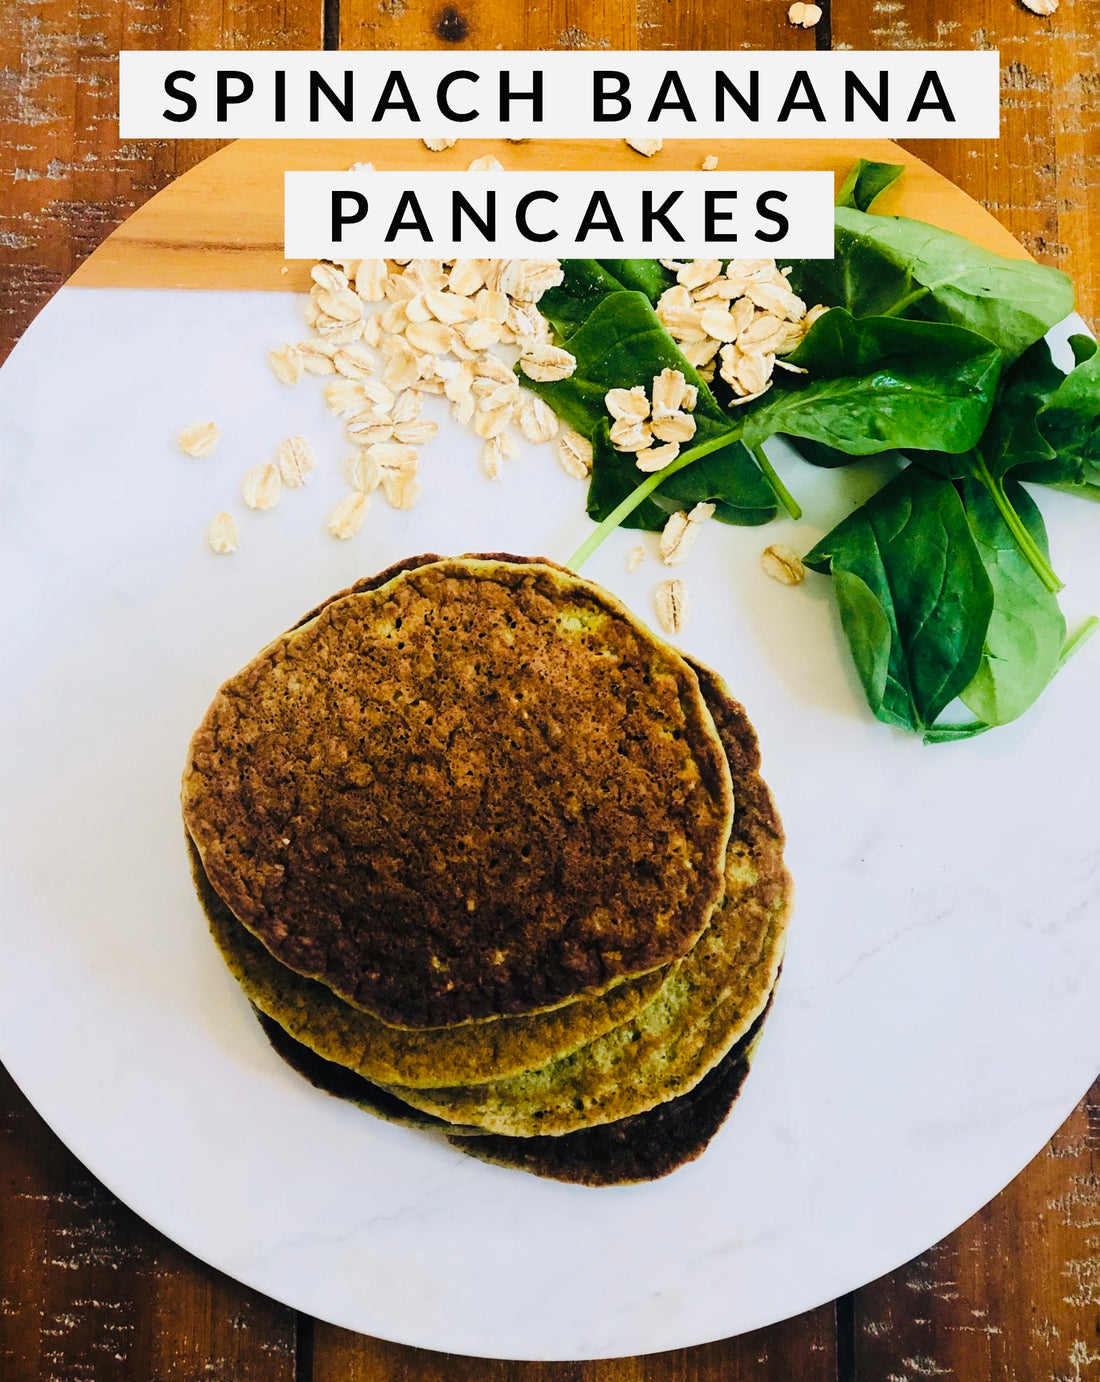 Spinach Banana Oat Pancakes (Gluten Free, Dairy Free)